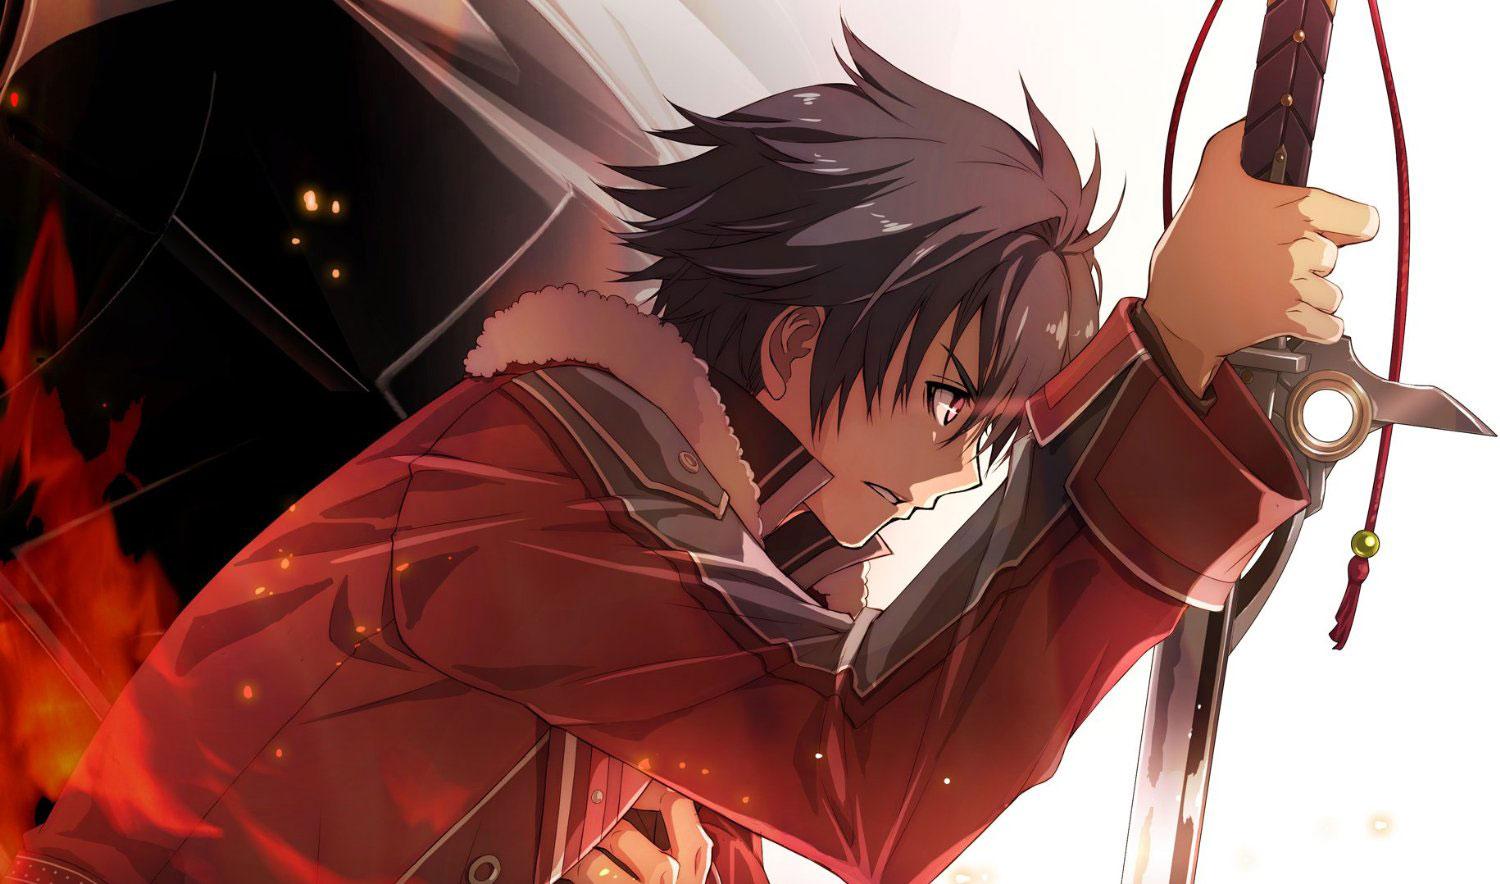 Return to Erebonia in Trails of Cold Steel II next month